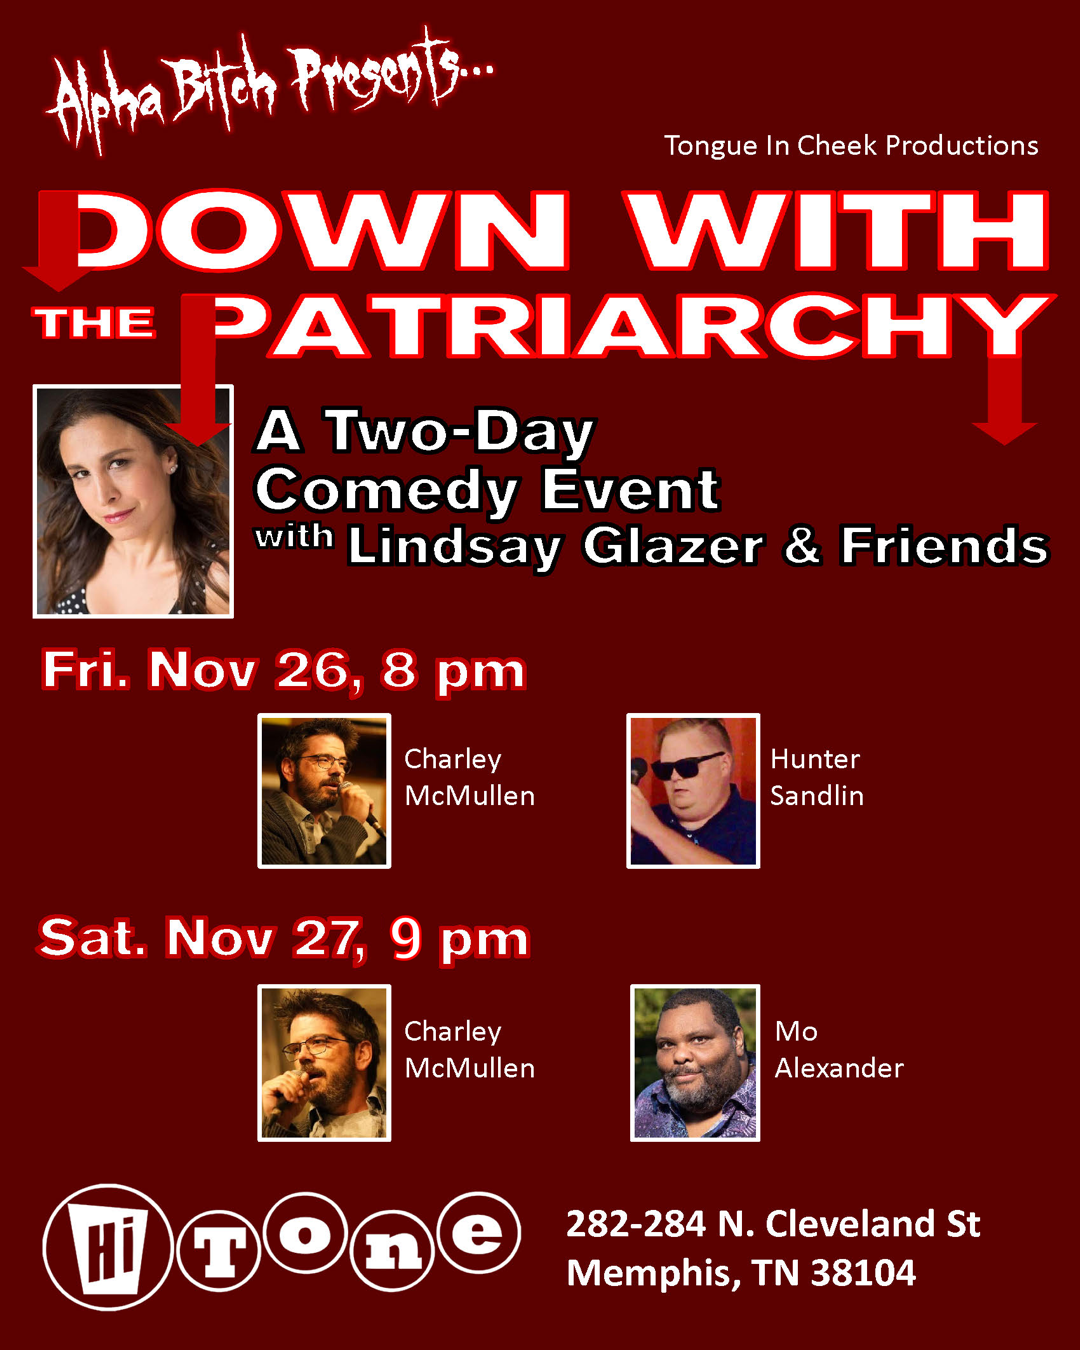 Down with the Patriarchy comedy show flyer